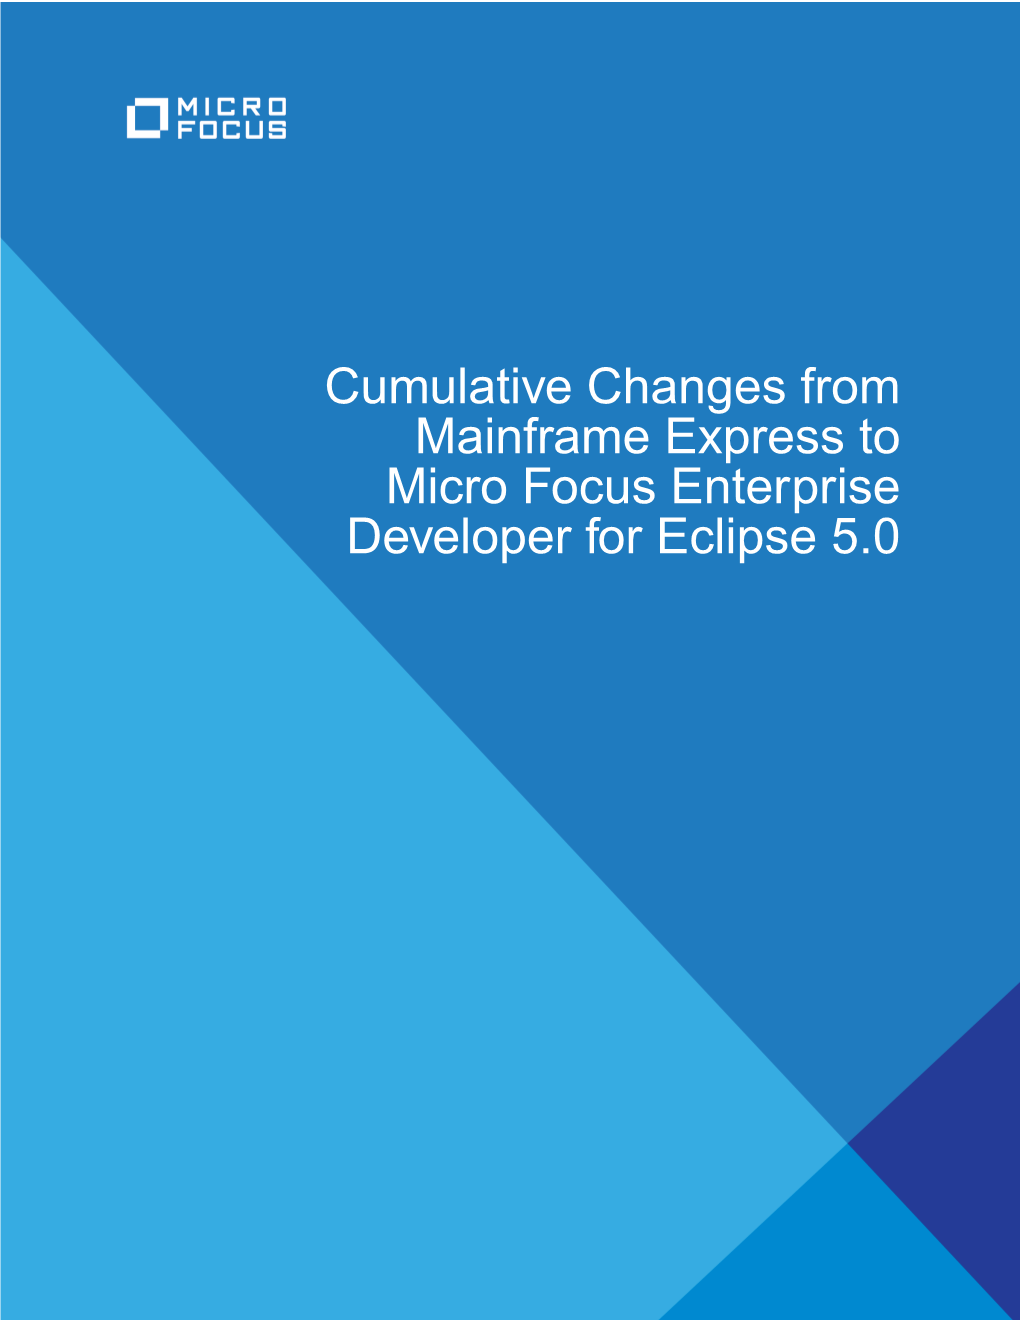 Cumulative Changes from Mainframe Express to Enterprise Developer for Eclipse